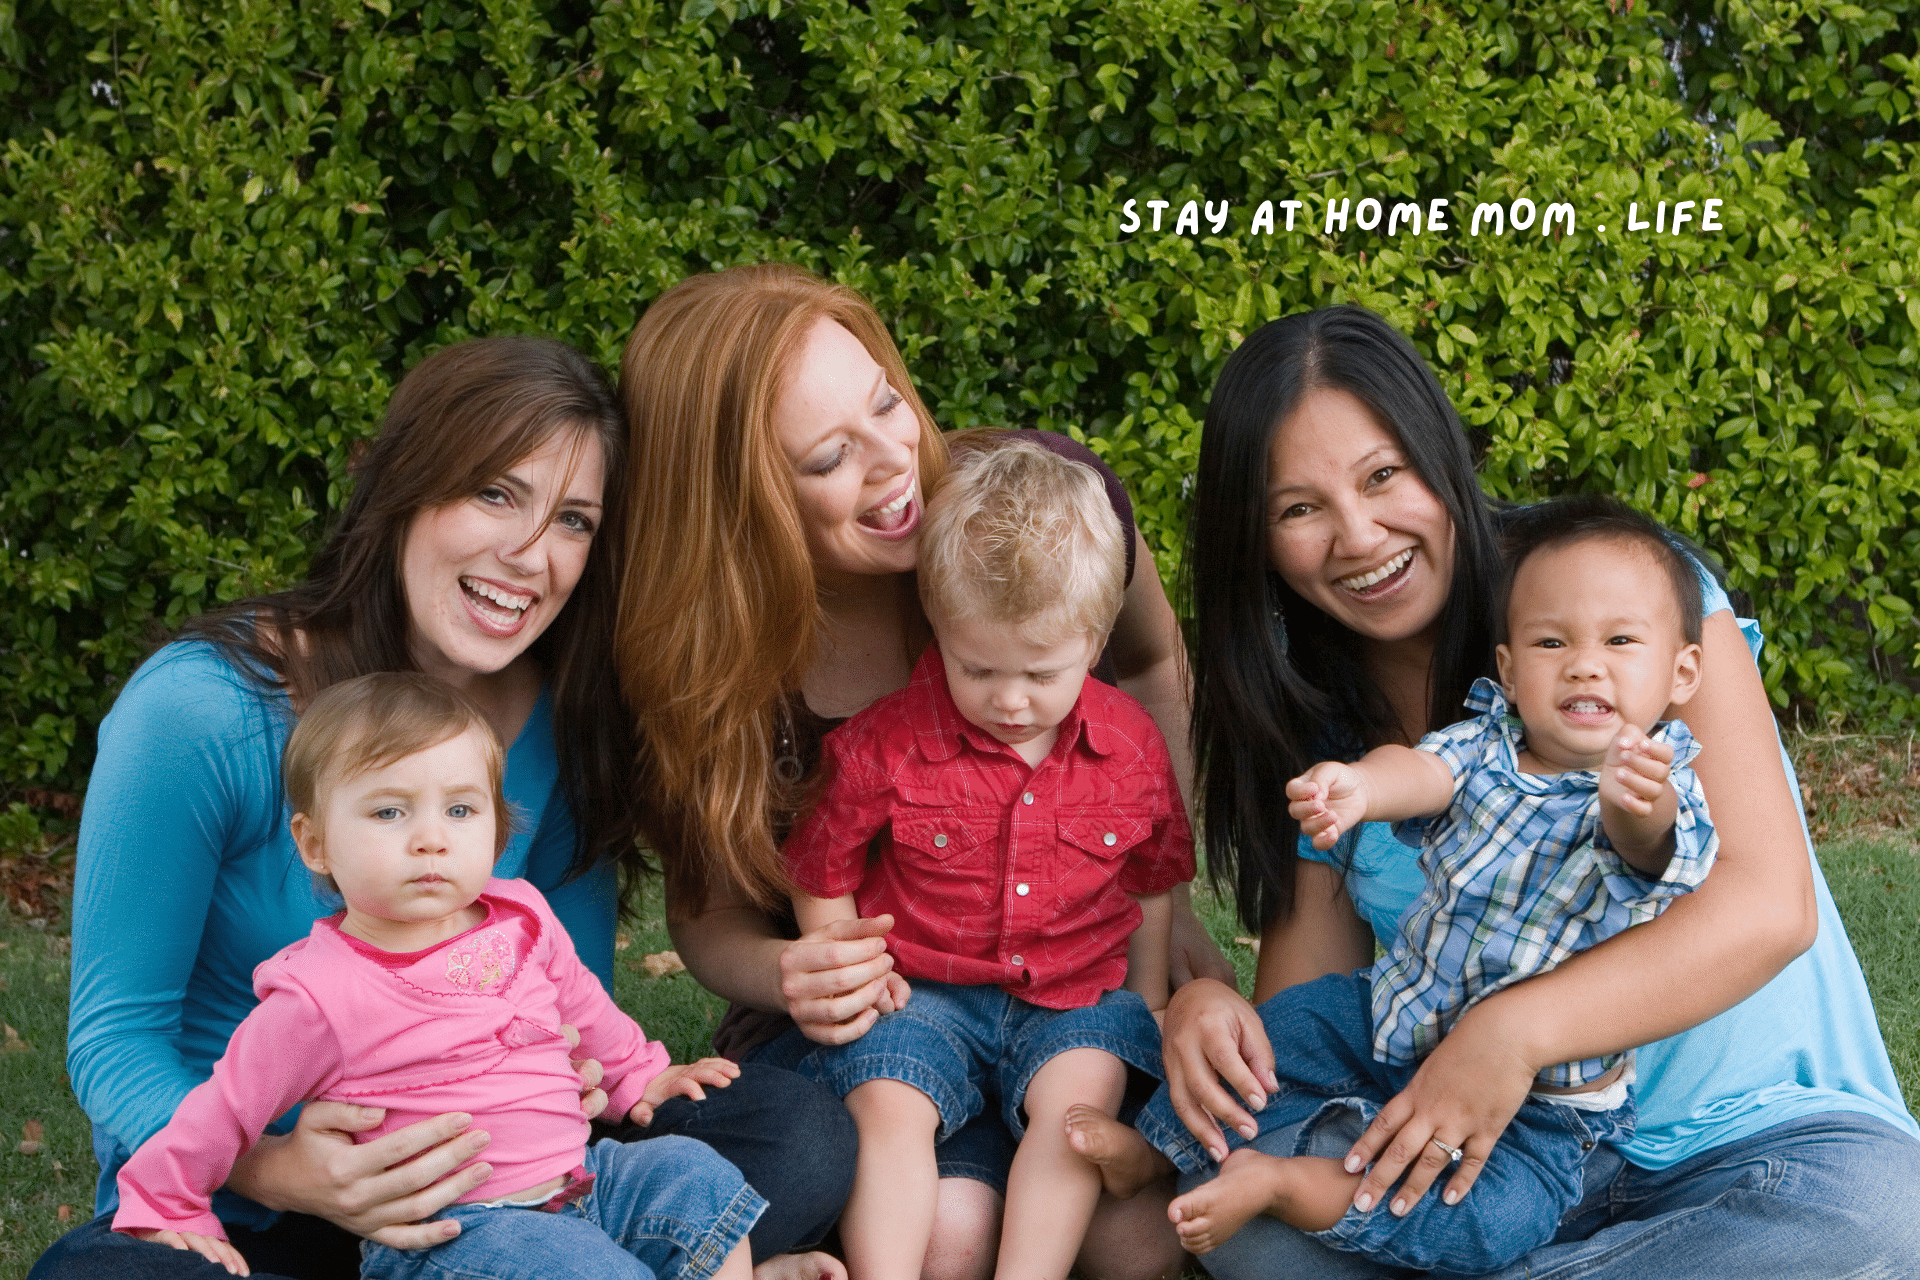 Stay-at-home mom socializing tips